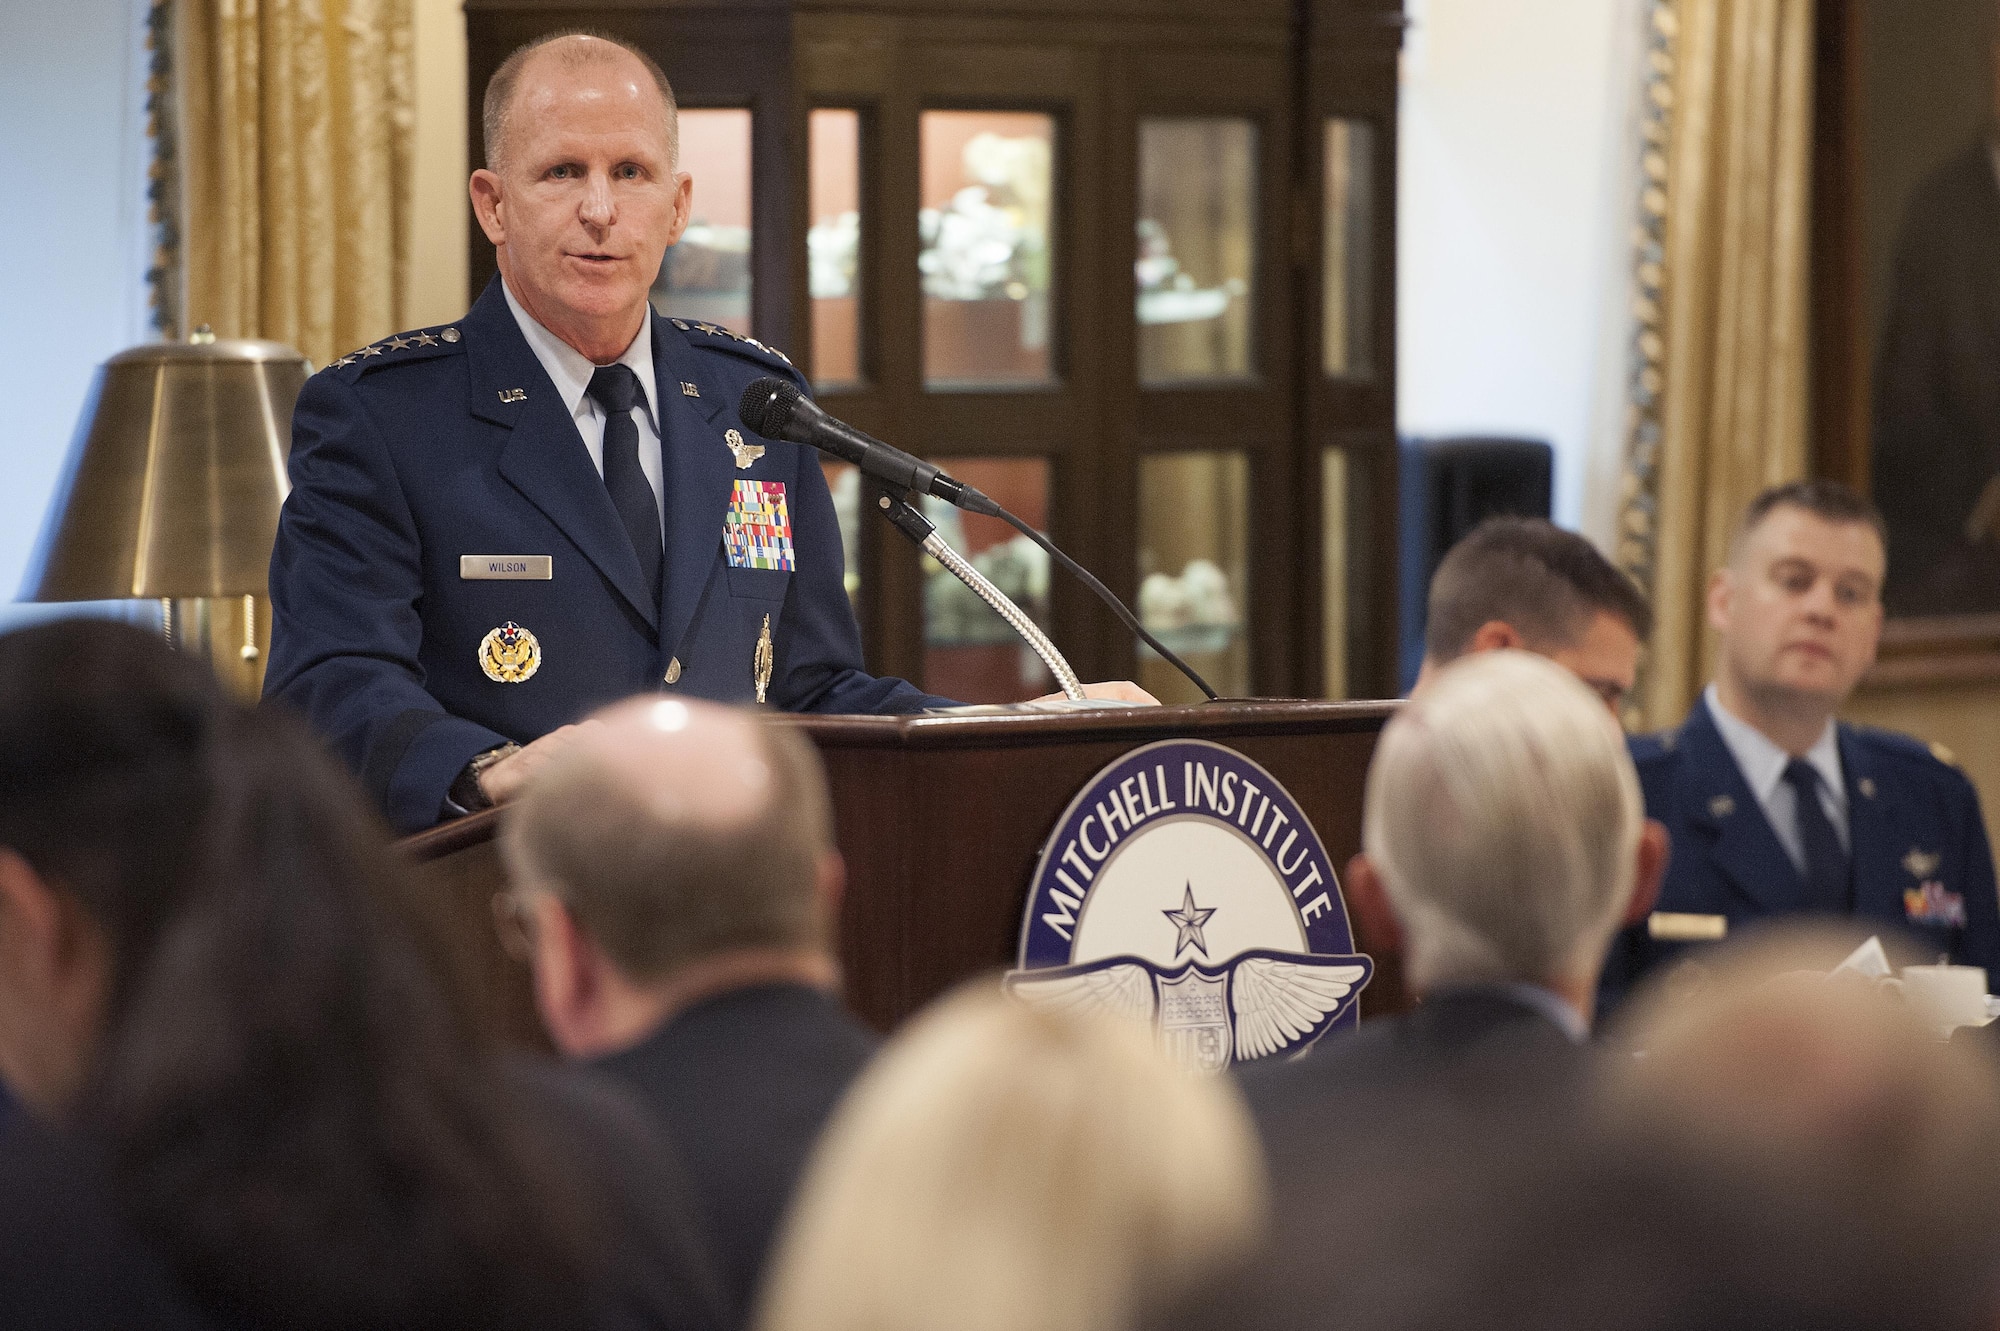 Vice Chief of Staff of the Air Force Gen. Stephen Wilson discusses modernization of the nuclear triad during an Air Force Association breakfast at the Capitol Hill Club in Washington, D.C., May 25, 2017. The Air Force maintains two legs of the nuclear triad, including the aircraft capable of carrying nuclear weapons, more than 400 intercontinental ballistic missiles, as well as 75 percent of the Nuclear Command, Control and Communication that connects the president to senior military leaders and approximately 30,000 Airmen maintaining this capability. (U.S. Air Force photo/Tech. Sgt. Robert Barnett)